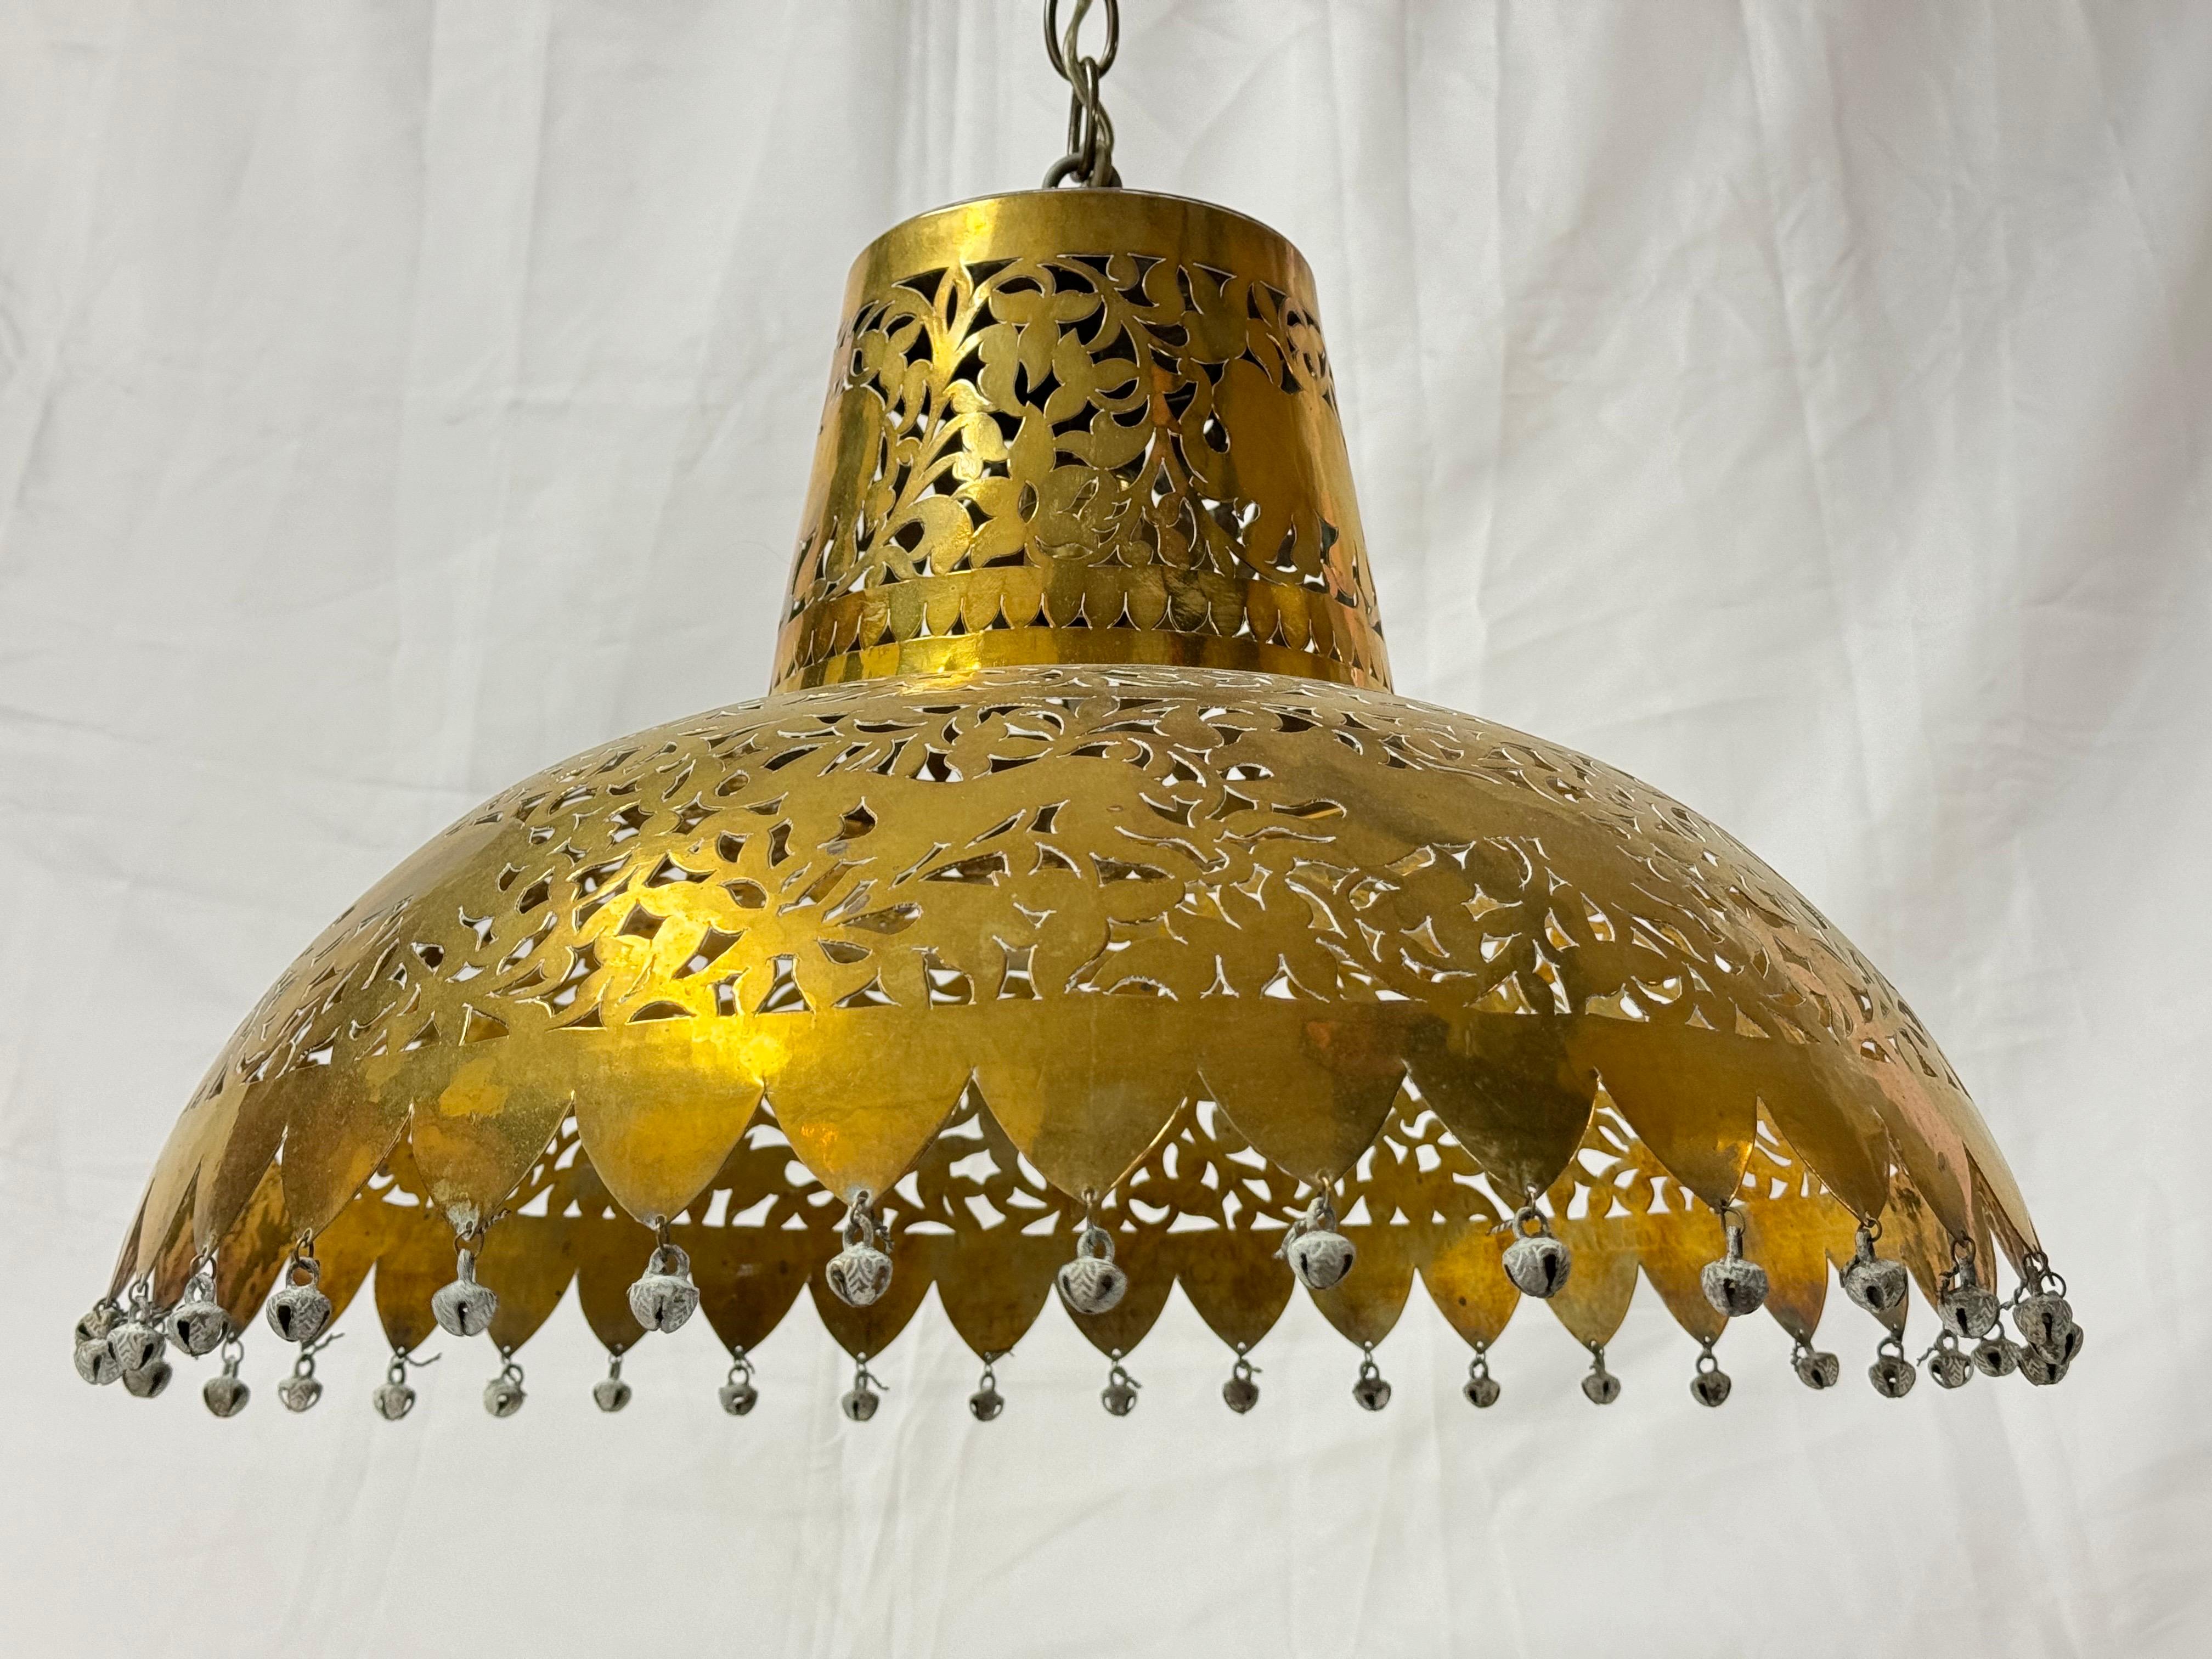  Pierced Brass Moroccan Chandelier. Exotic pendant light with bells as trimmings on the outer circle .Elaborate carved animal figures which the light reflects through makes this a magical light.
Length of electric cord is 278